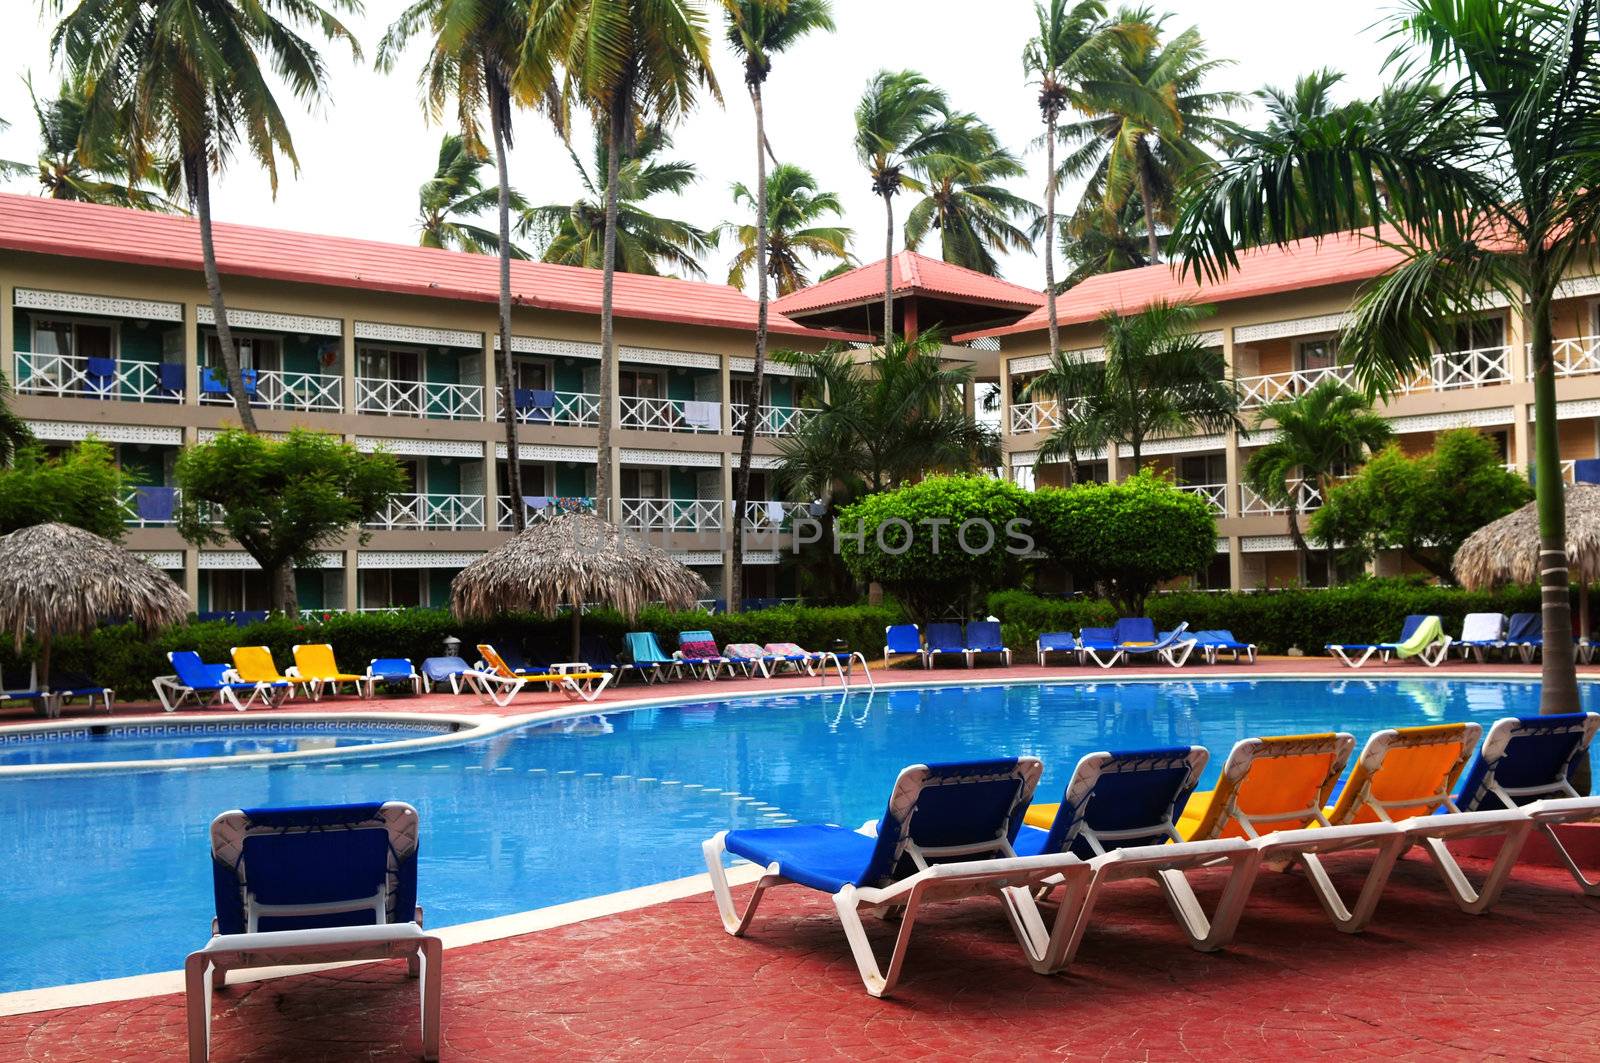 Swimming pool and accommodation at tropical resort